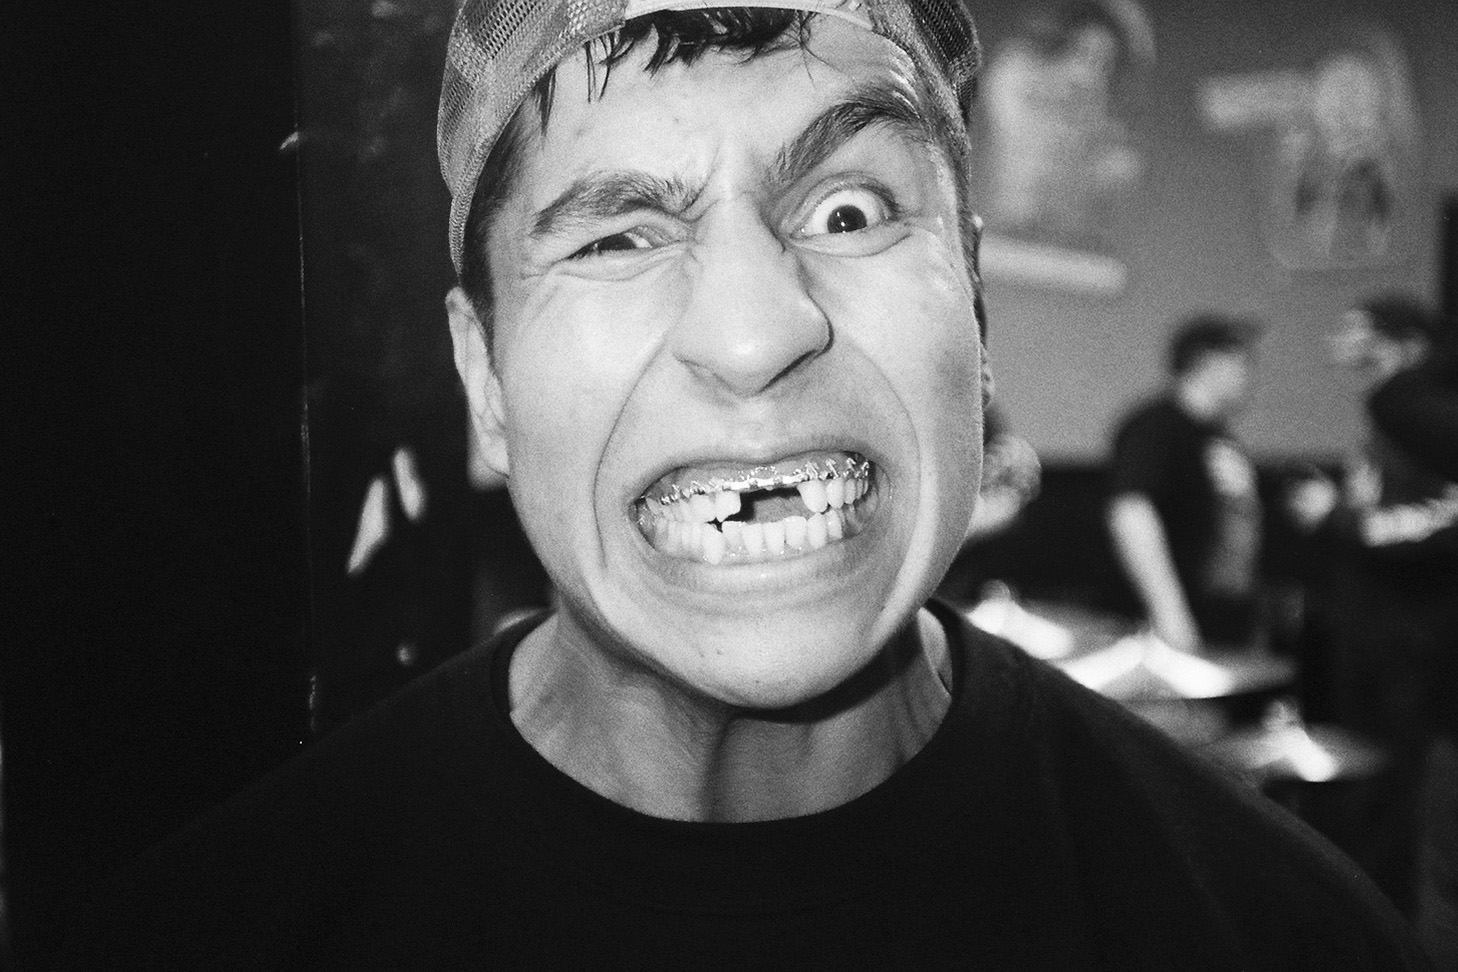 Walter Delgado of Rotting Out with makeup.